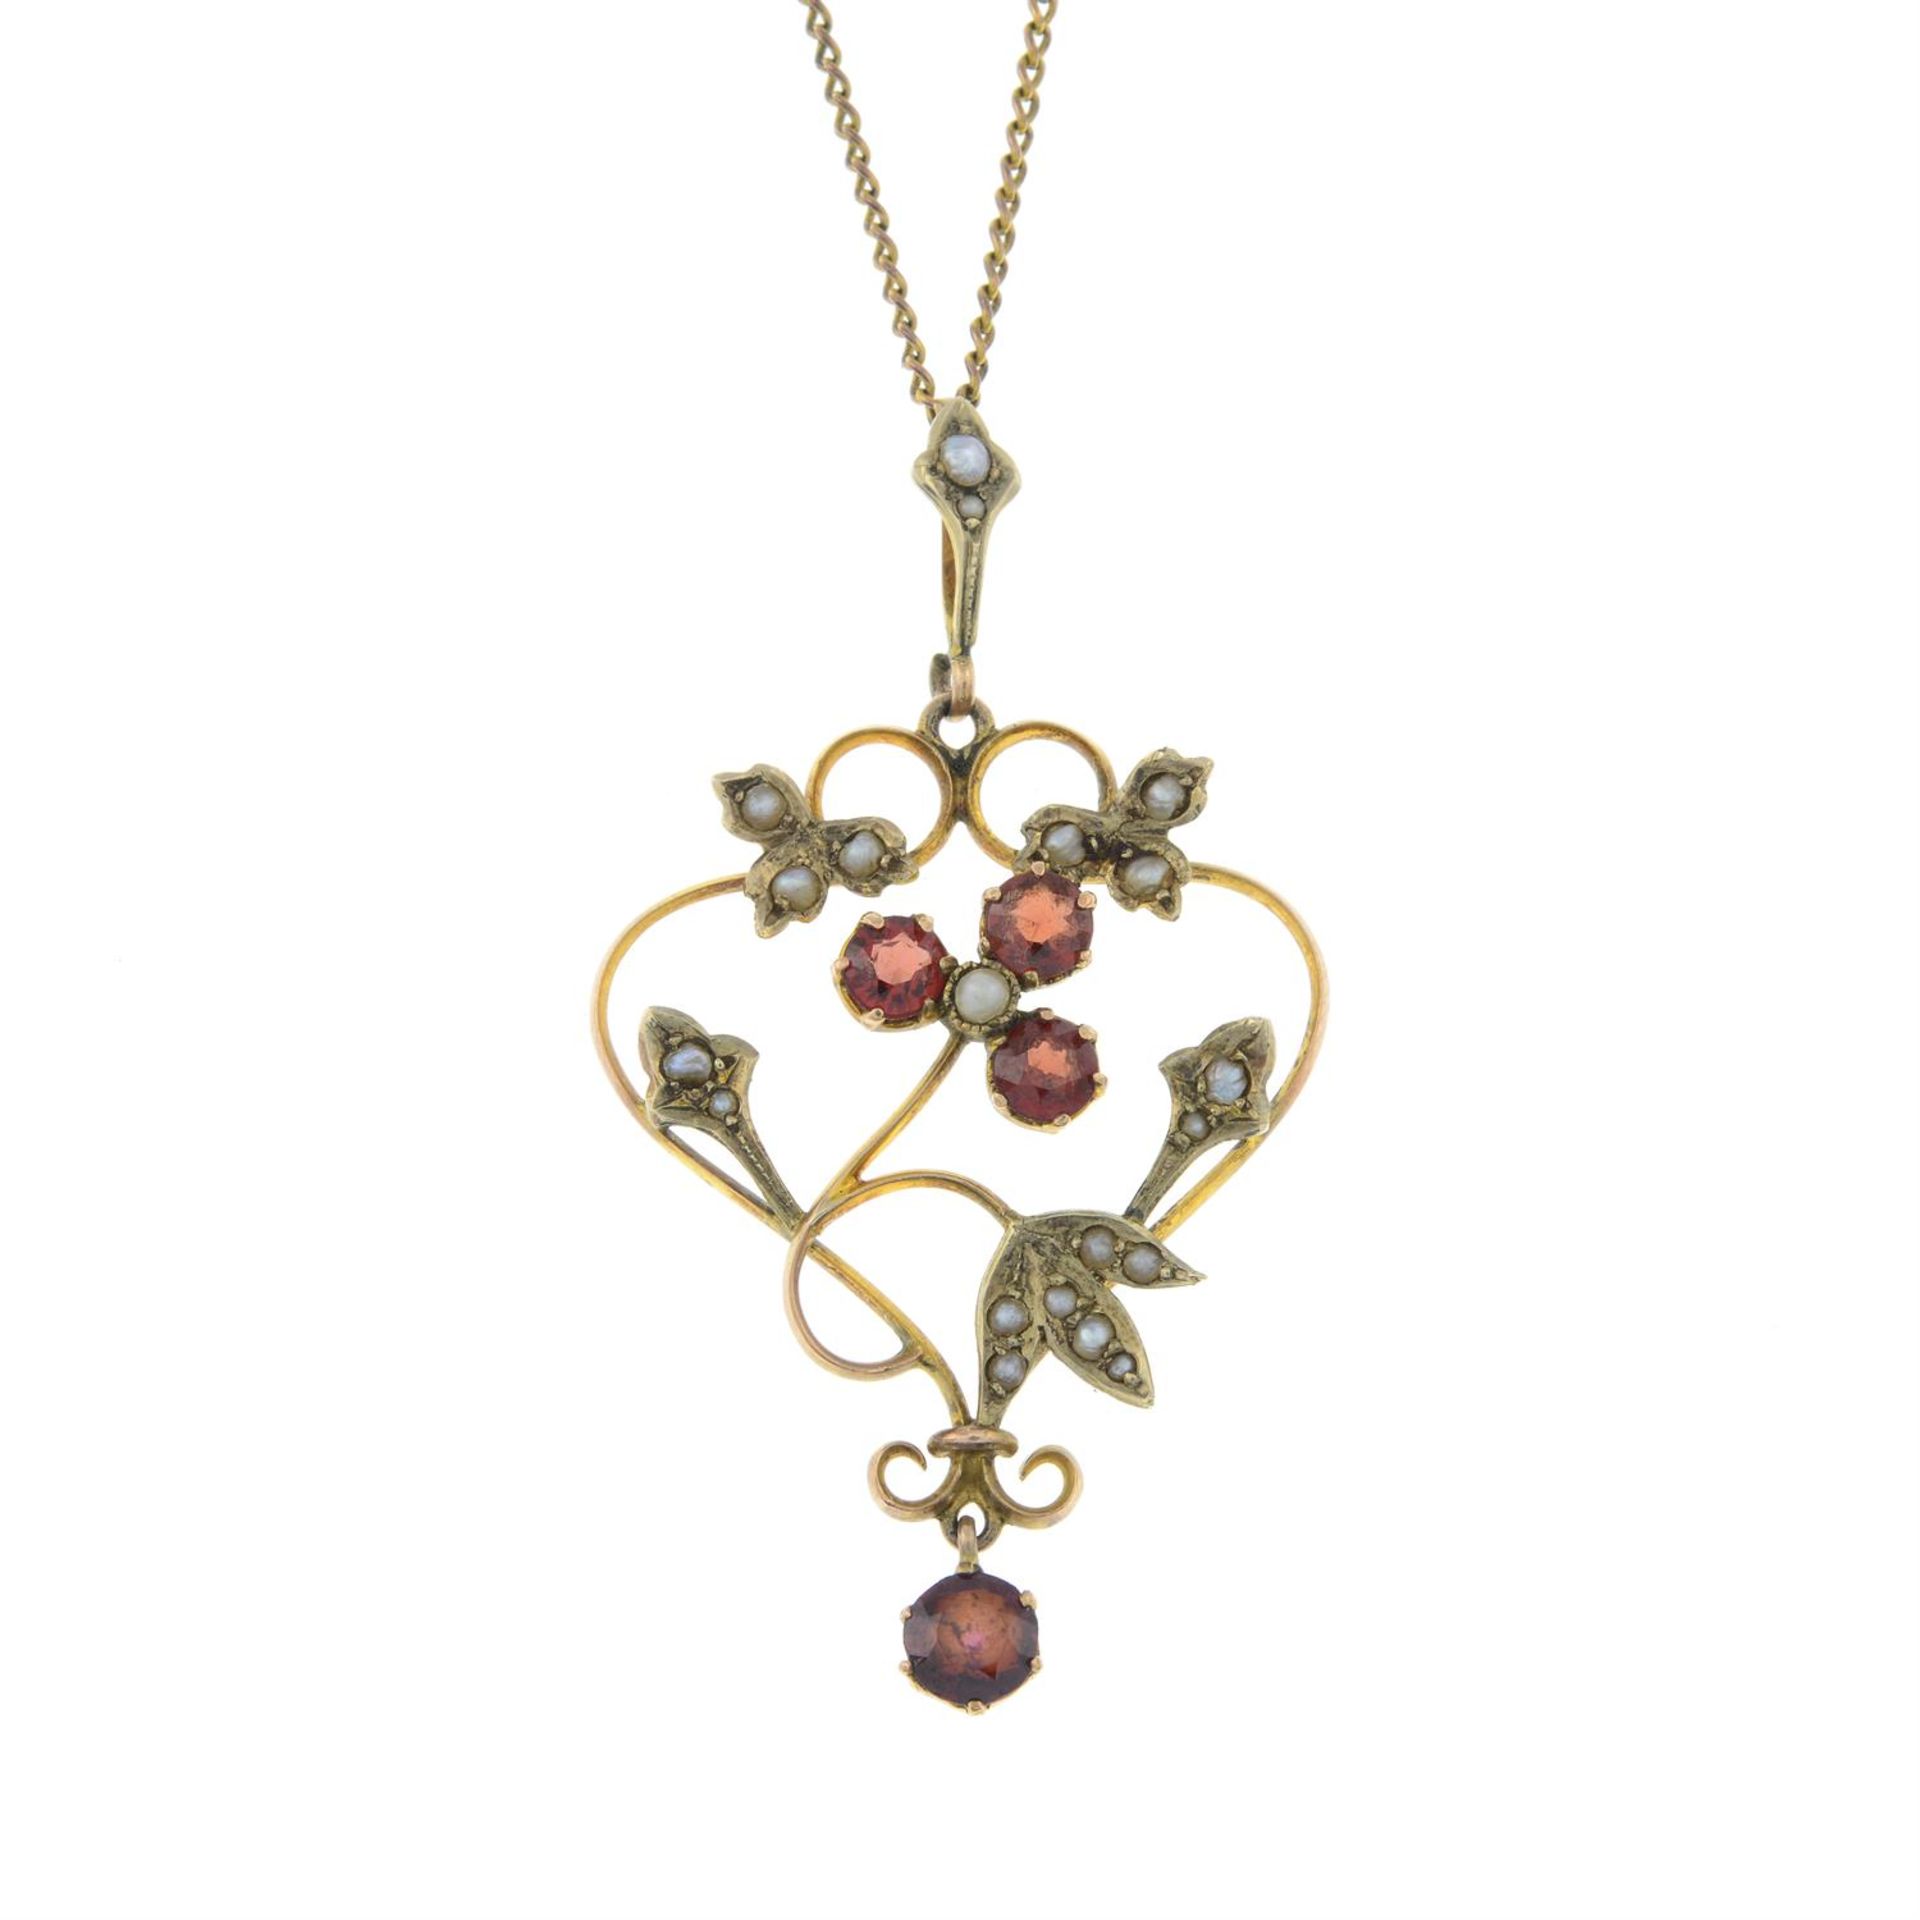 An early 20th century 9ct gold garnet and split pearl openwork pendant, with trace-link chain.